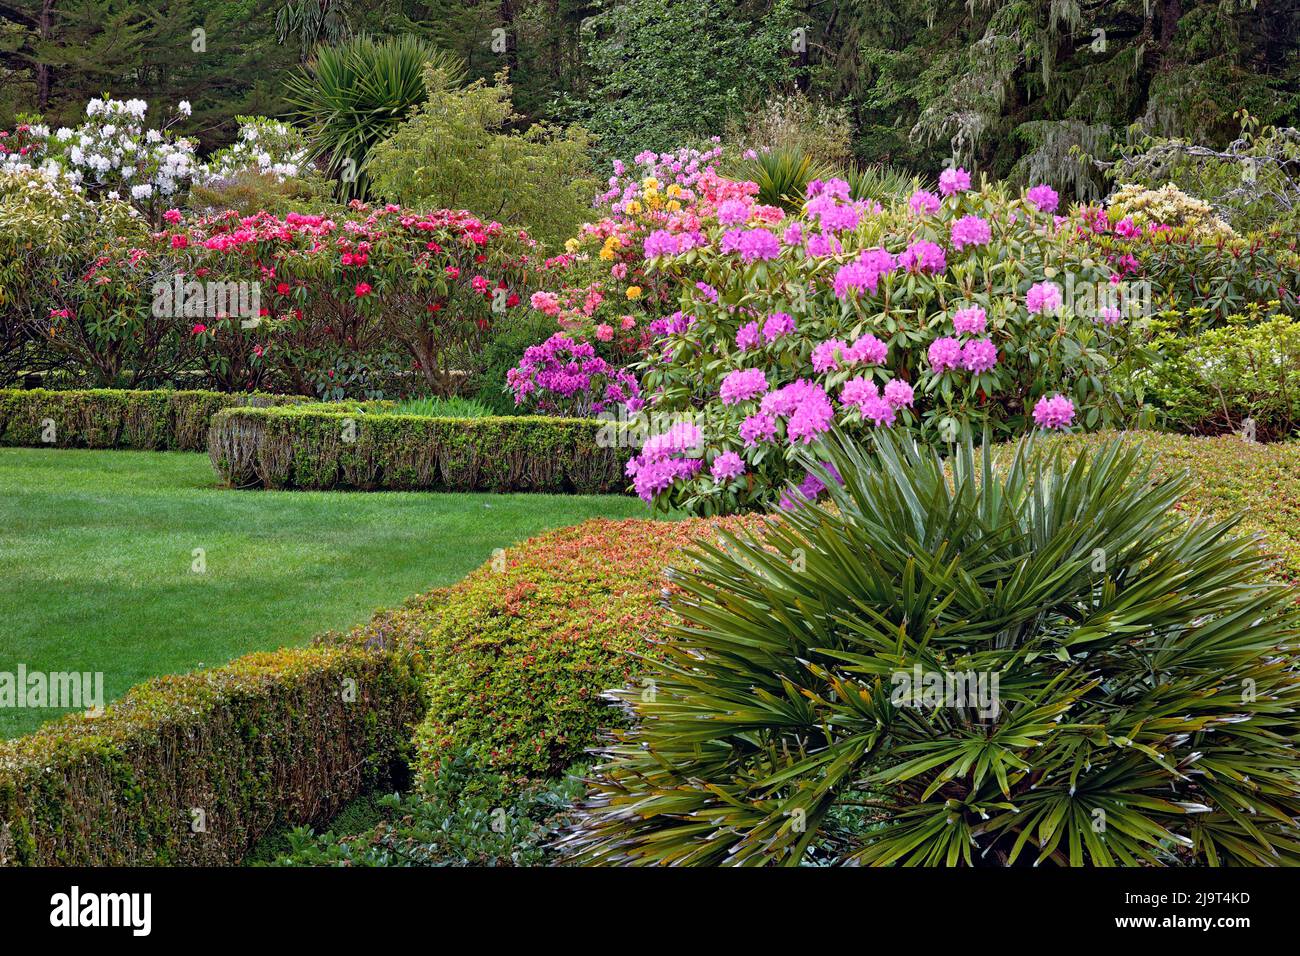 Rhododendron in full bloom, Shore Acres State Park, Coos Bay, Oregon Stock Photo